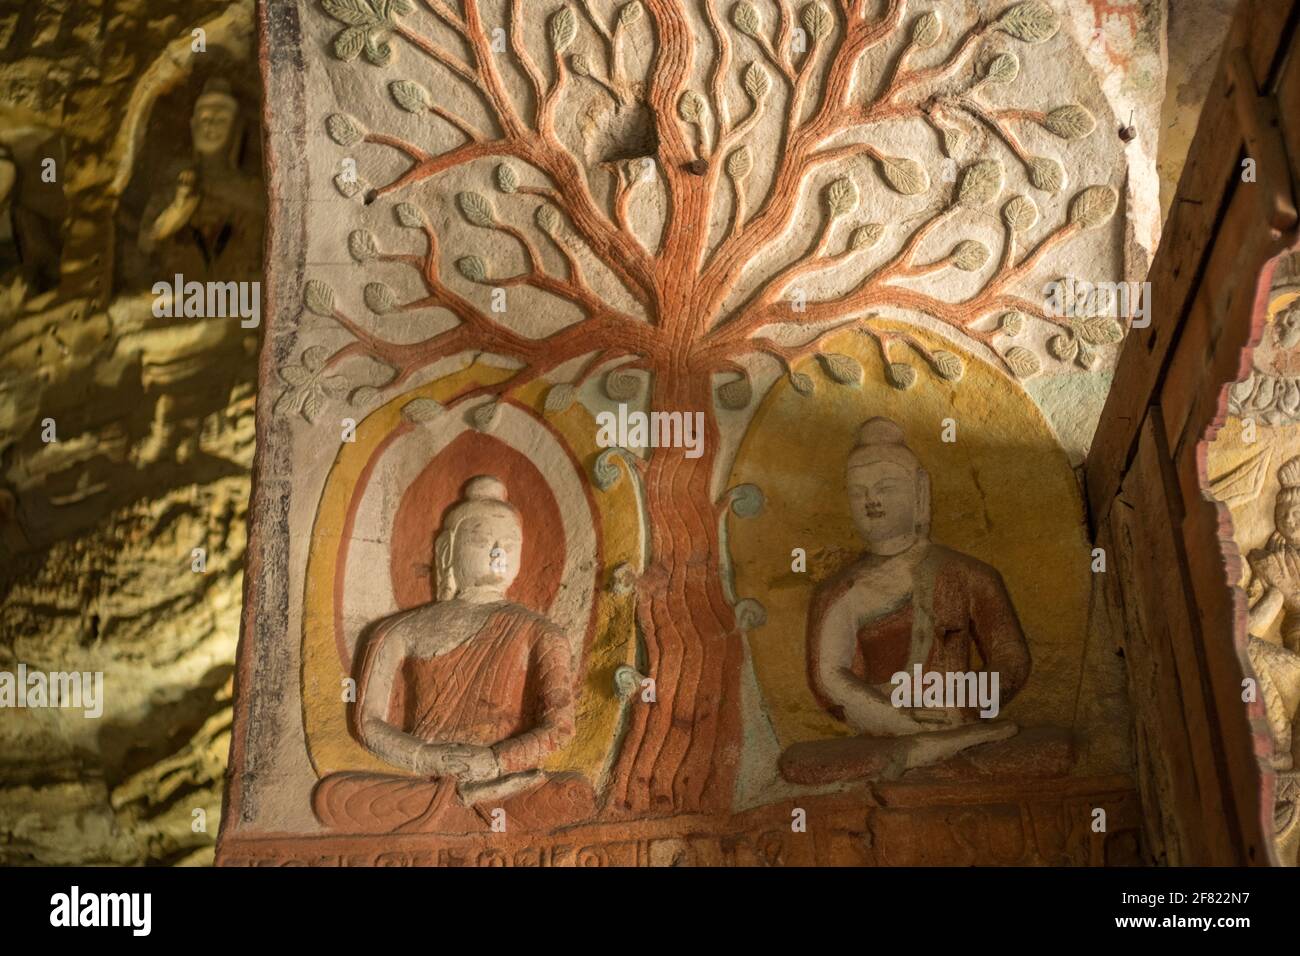 Bodhi tree and two Buddha sitting statues at Yungang Grottoes, early Buddhist cave temples, Unesco World Heritage Site, Shanxi, China. Stock Photo